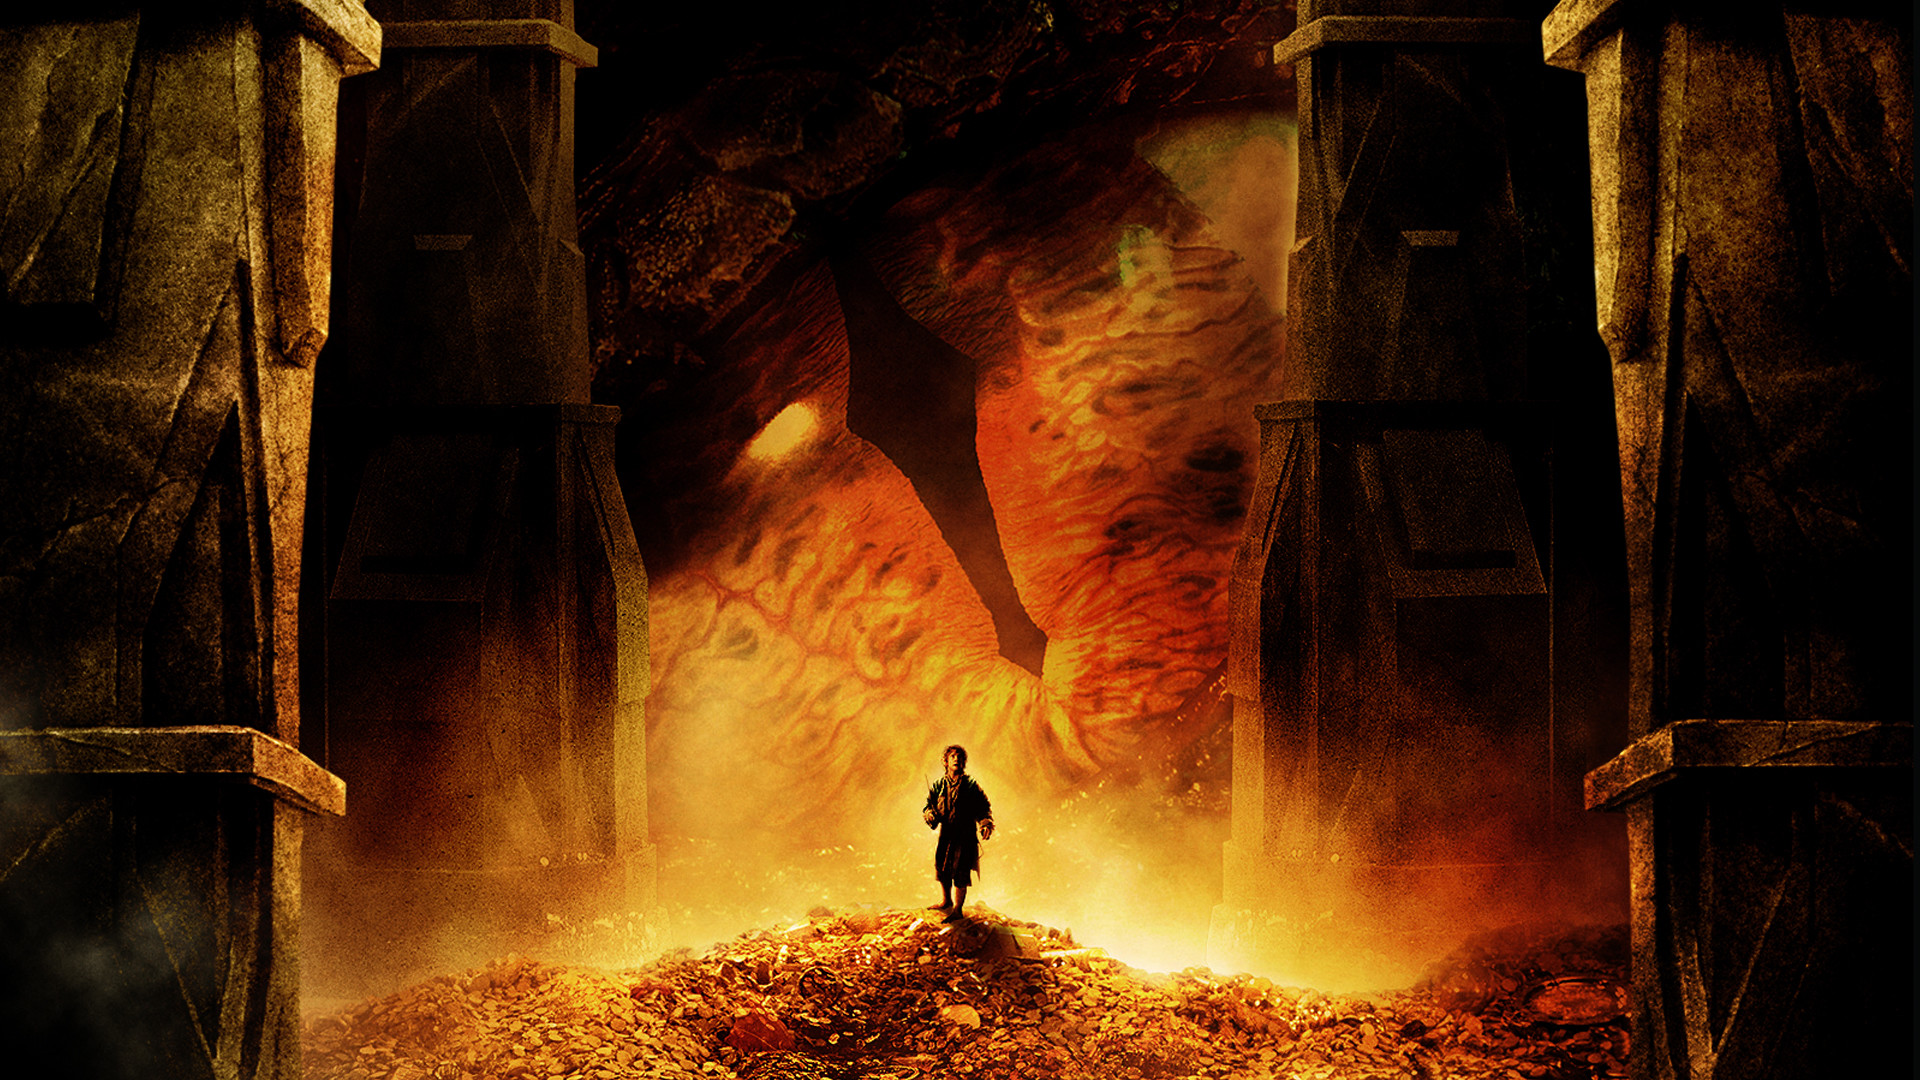 1920x1080 ... The Hobbit The Desolation of Smaug  by sachso74